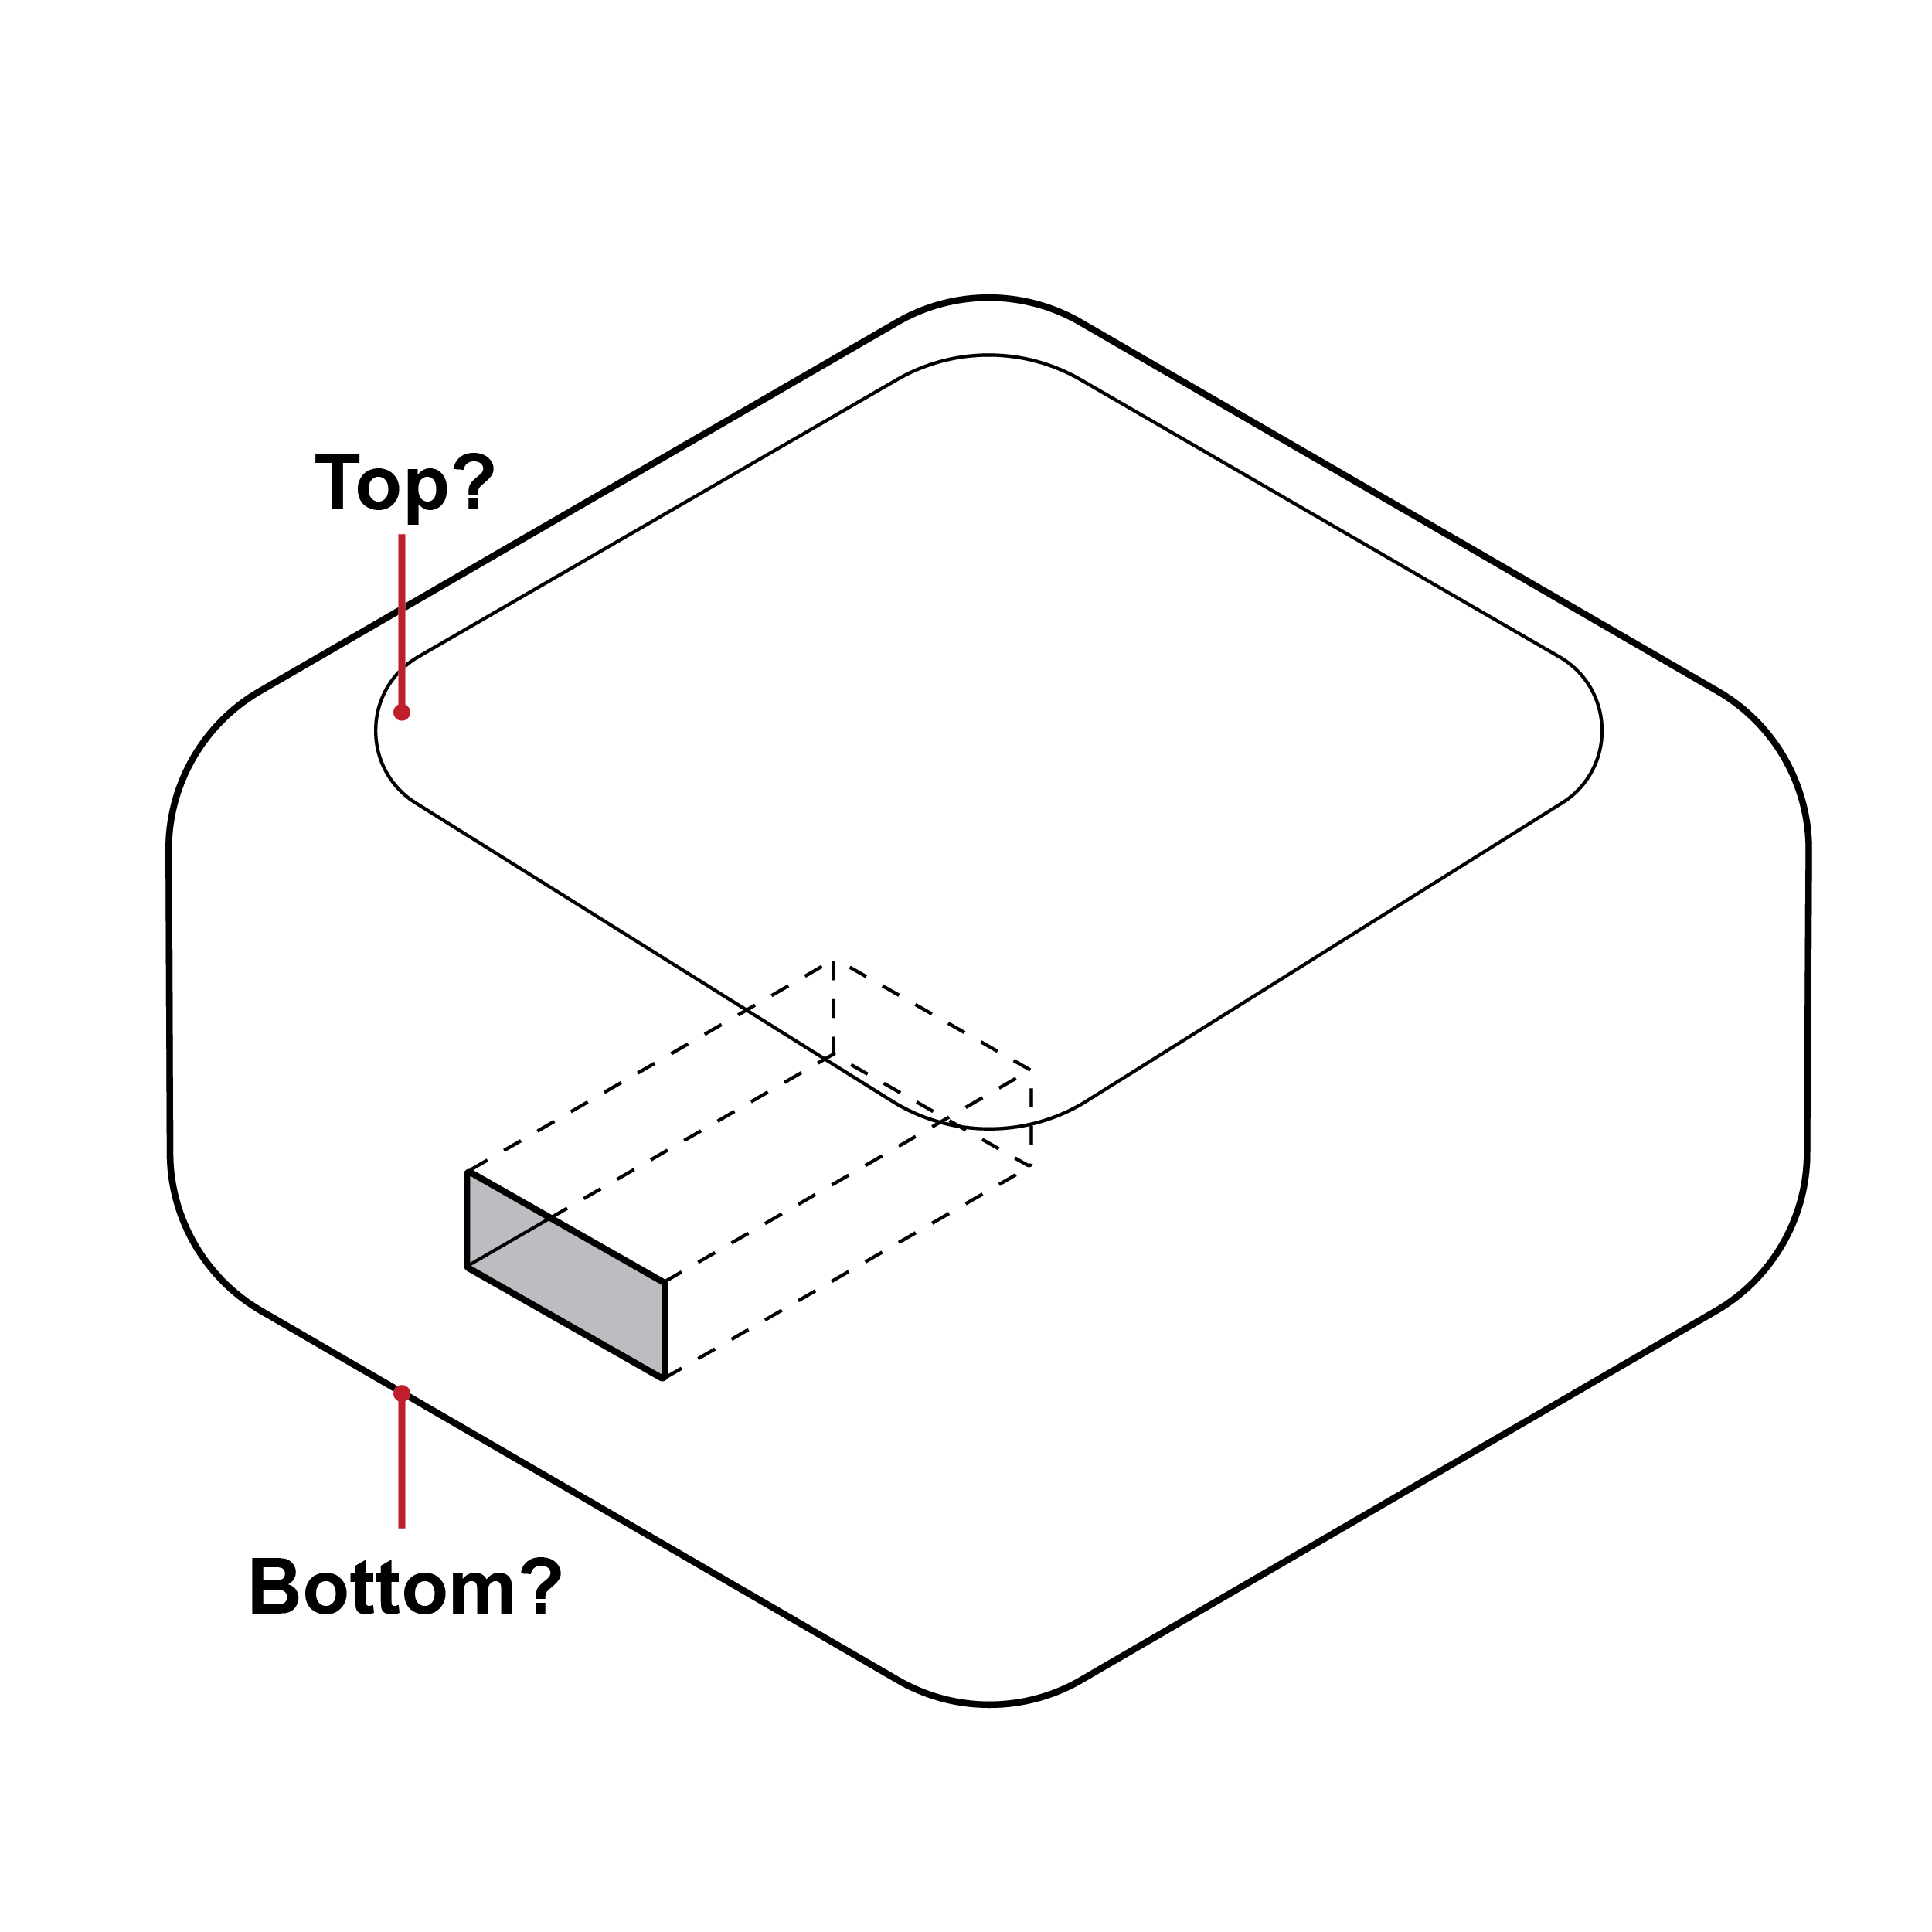 Test reader with square form factor. All sides are rounded and there are no remarkable features to distinguish orientation.